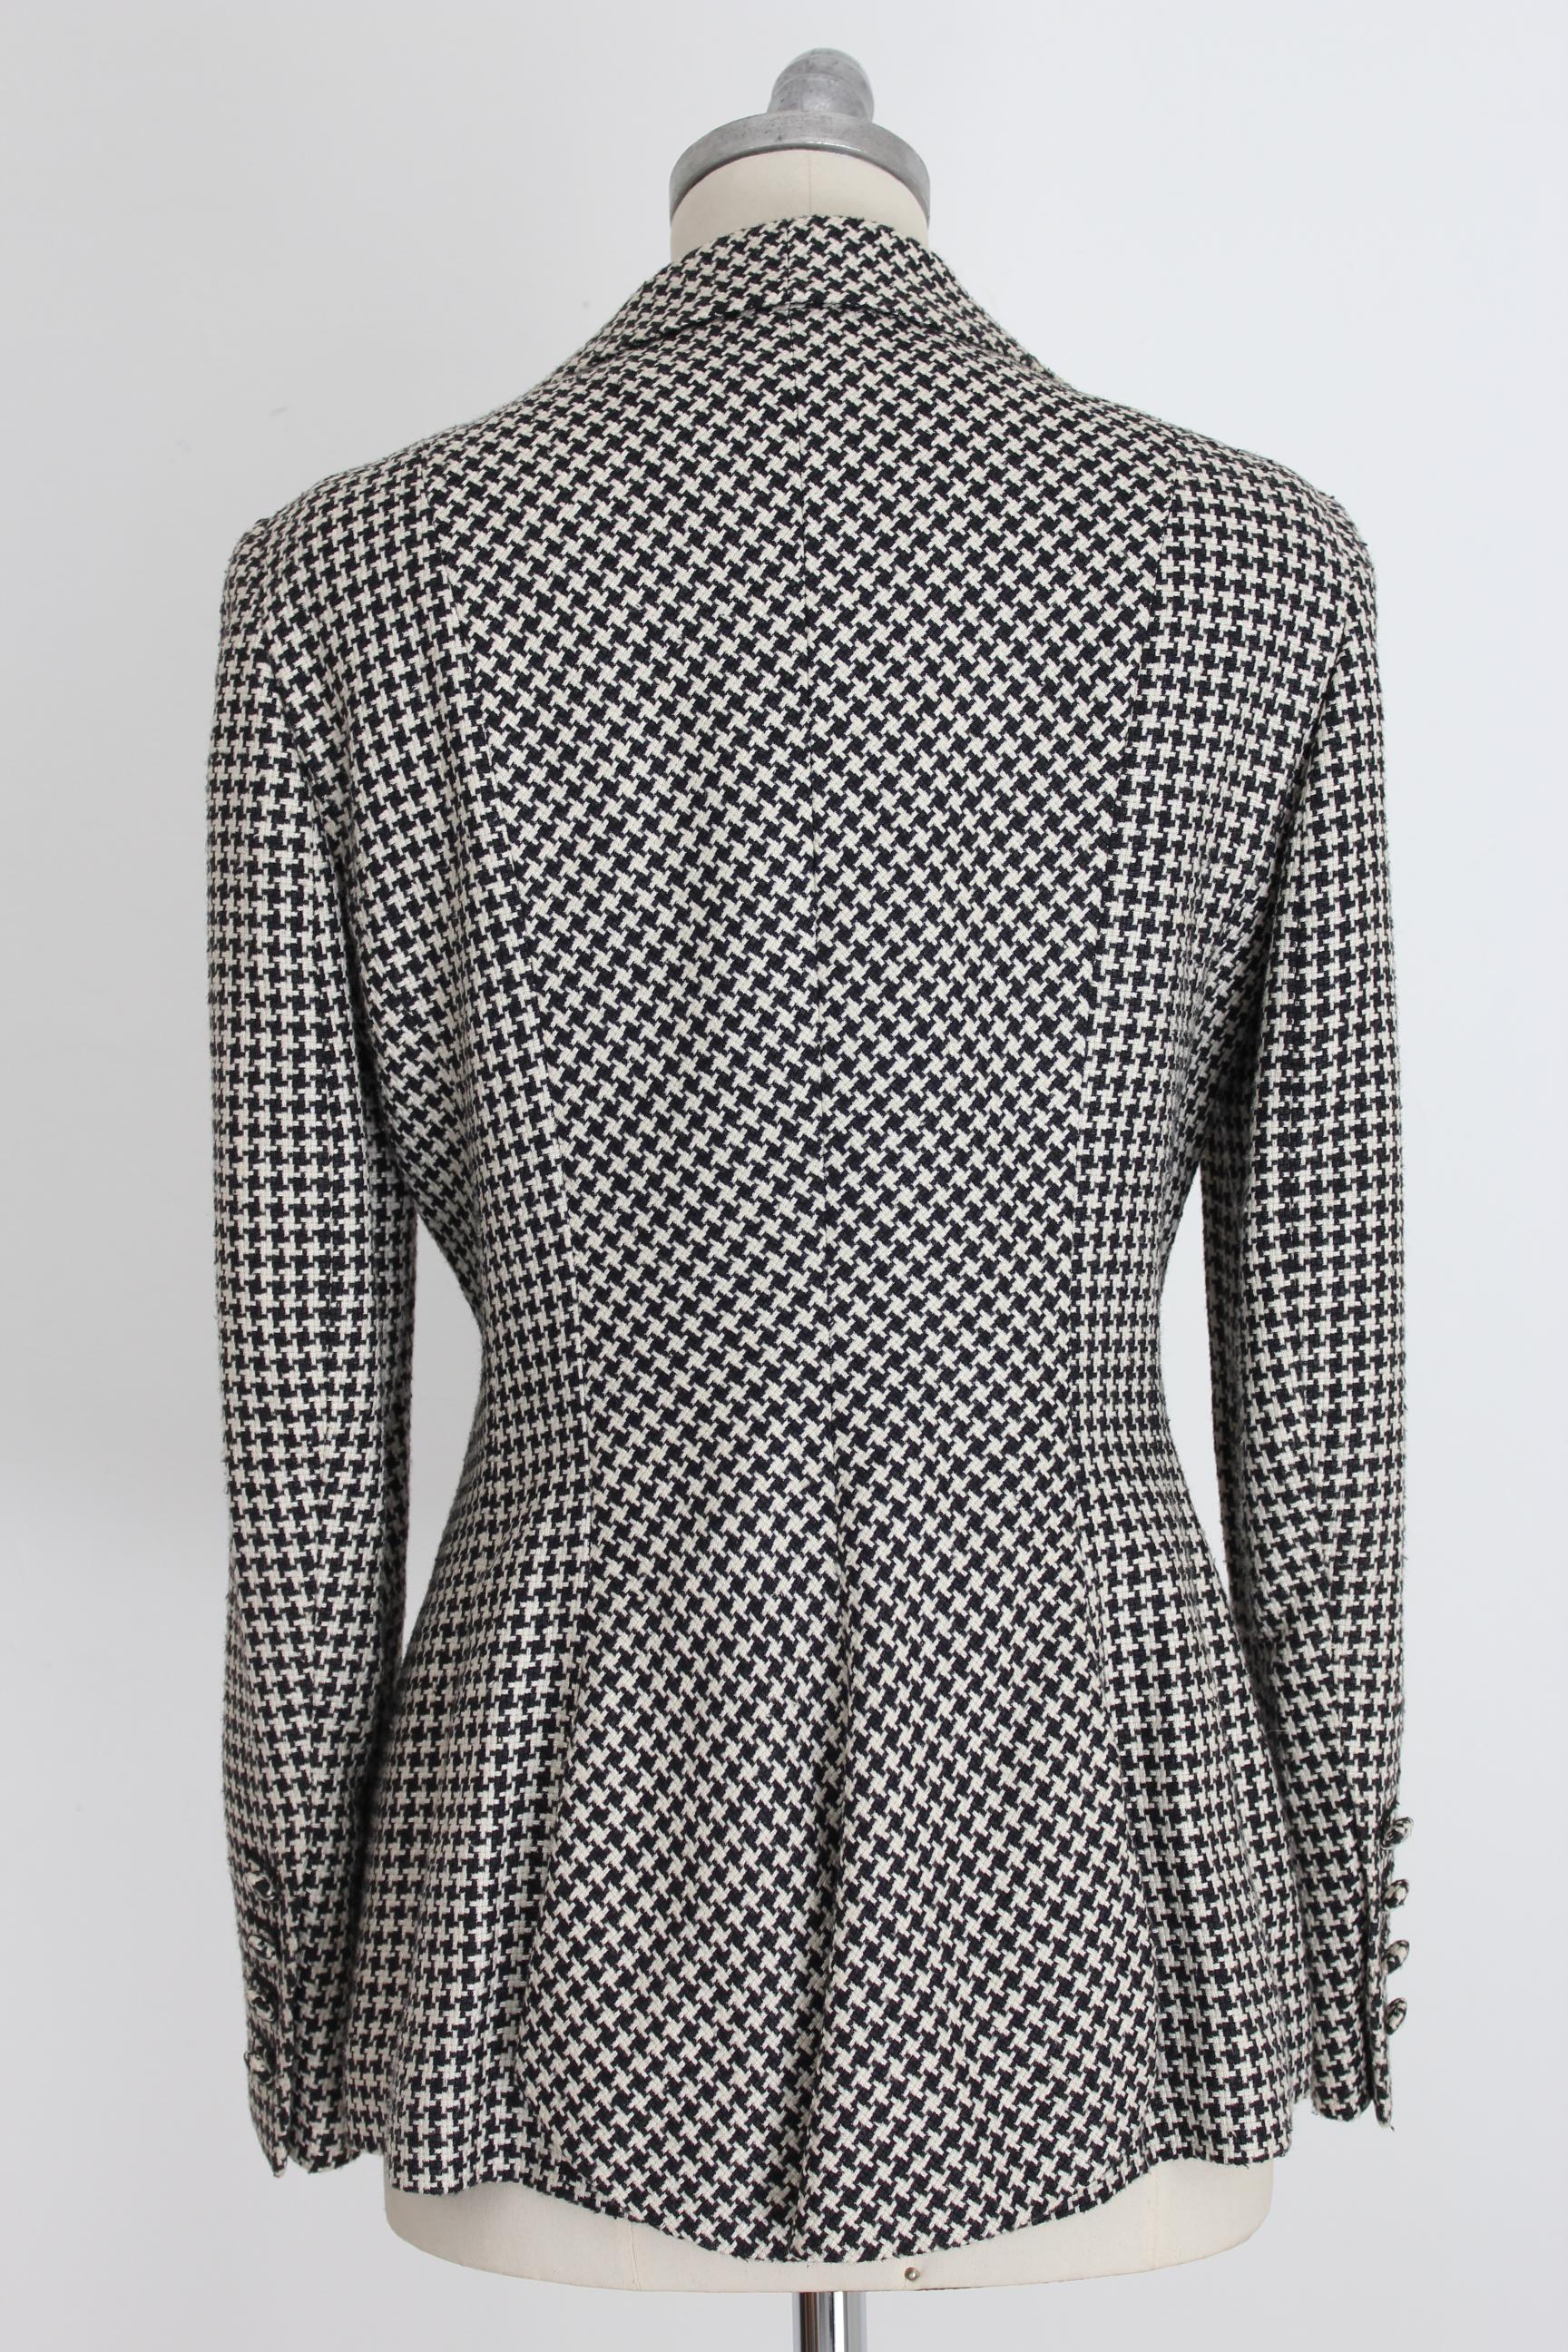 Rena Lange 80s vintage women's jacket. Black and white houndstooth pattern. 87% silk 13% cotton. Flared model, tone-on-tone button closure. Lined internally. Made in Italy. Excellent vintage conditions.

Size: 46 It 12 Us 14 Uk 40 De

Shoulder: 44